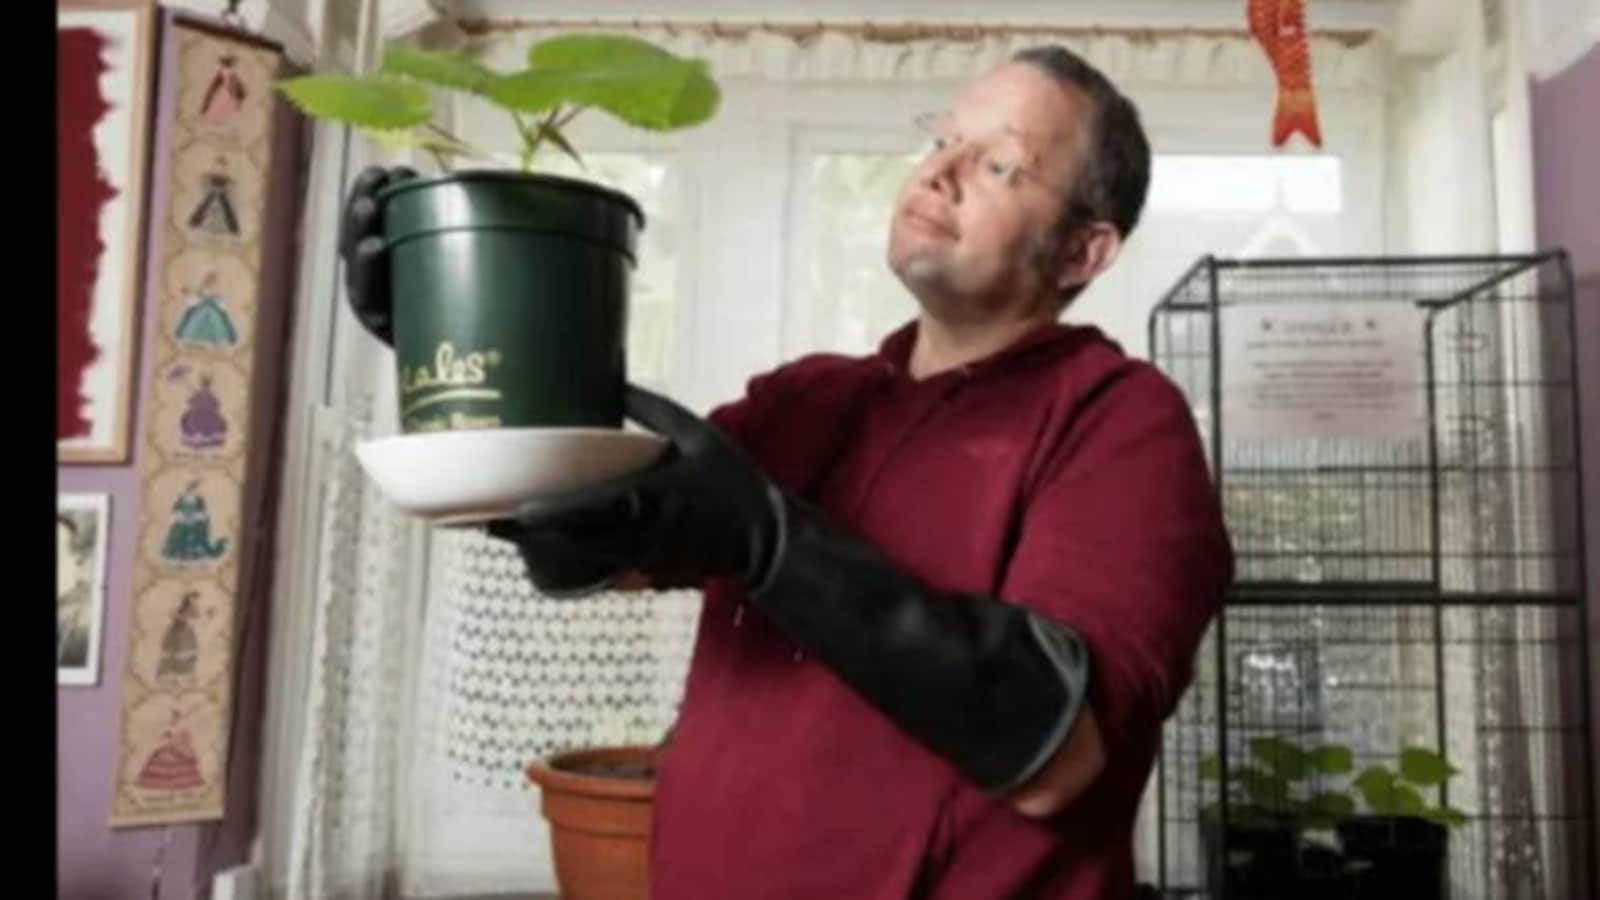 UK man 'world's most dangerous plant' at home because he was bored